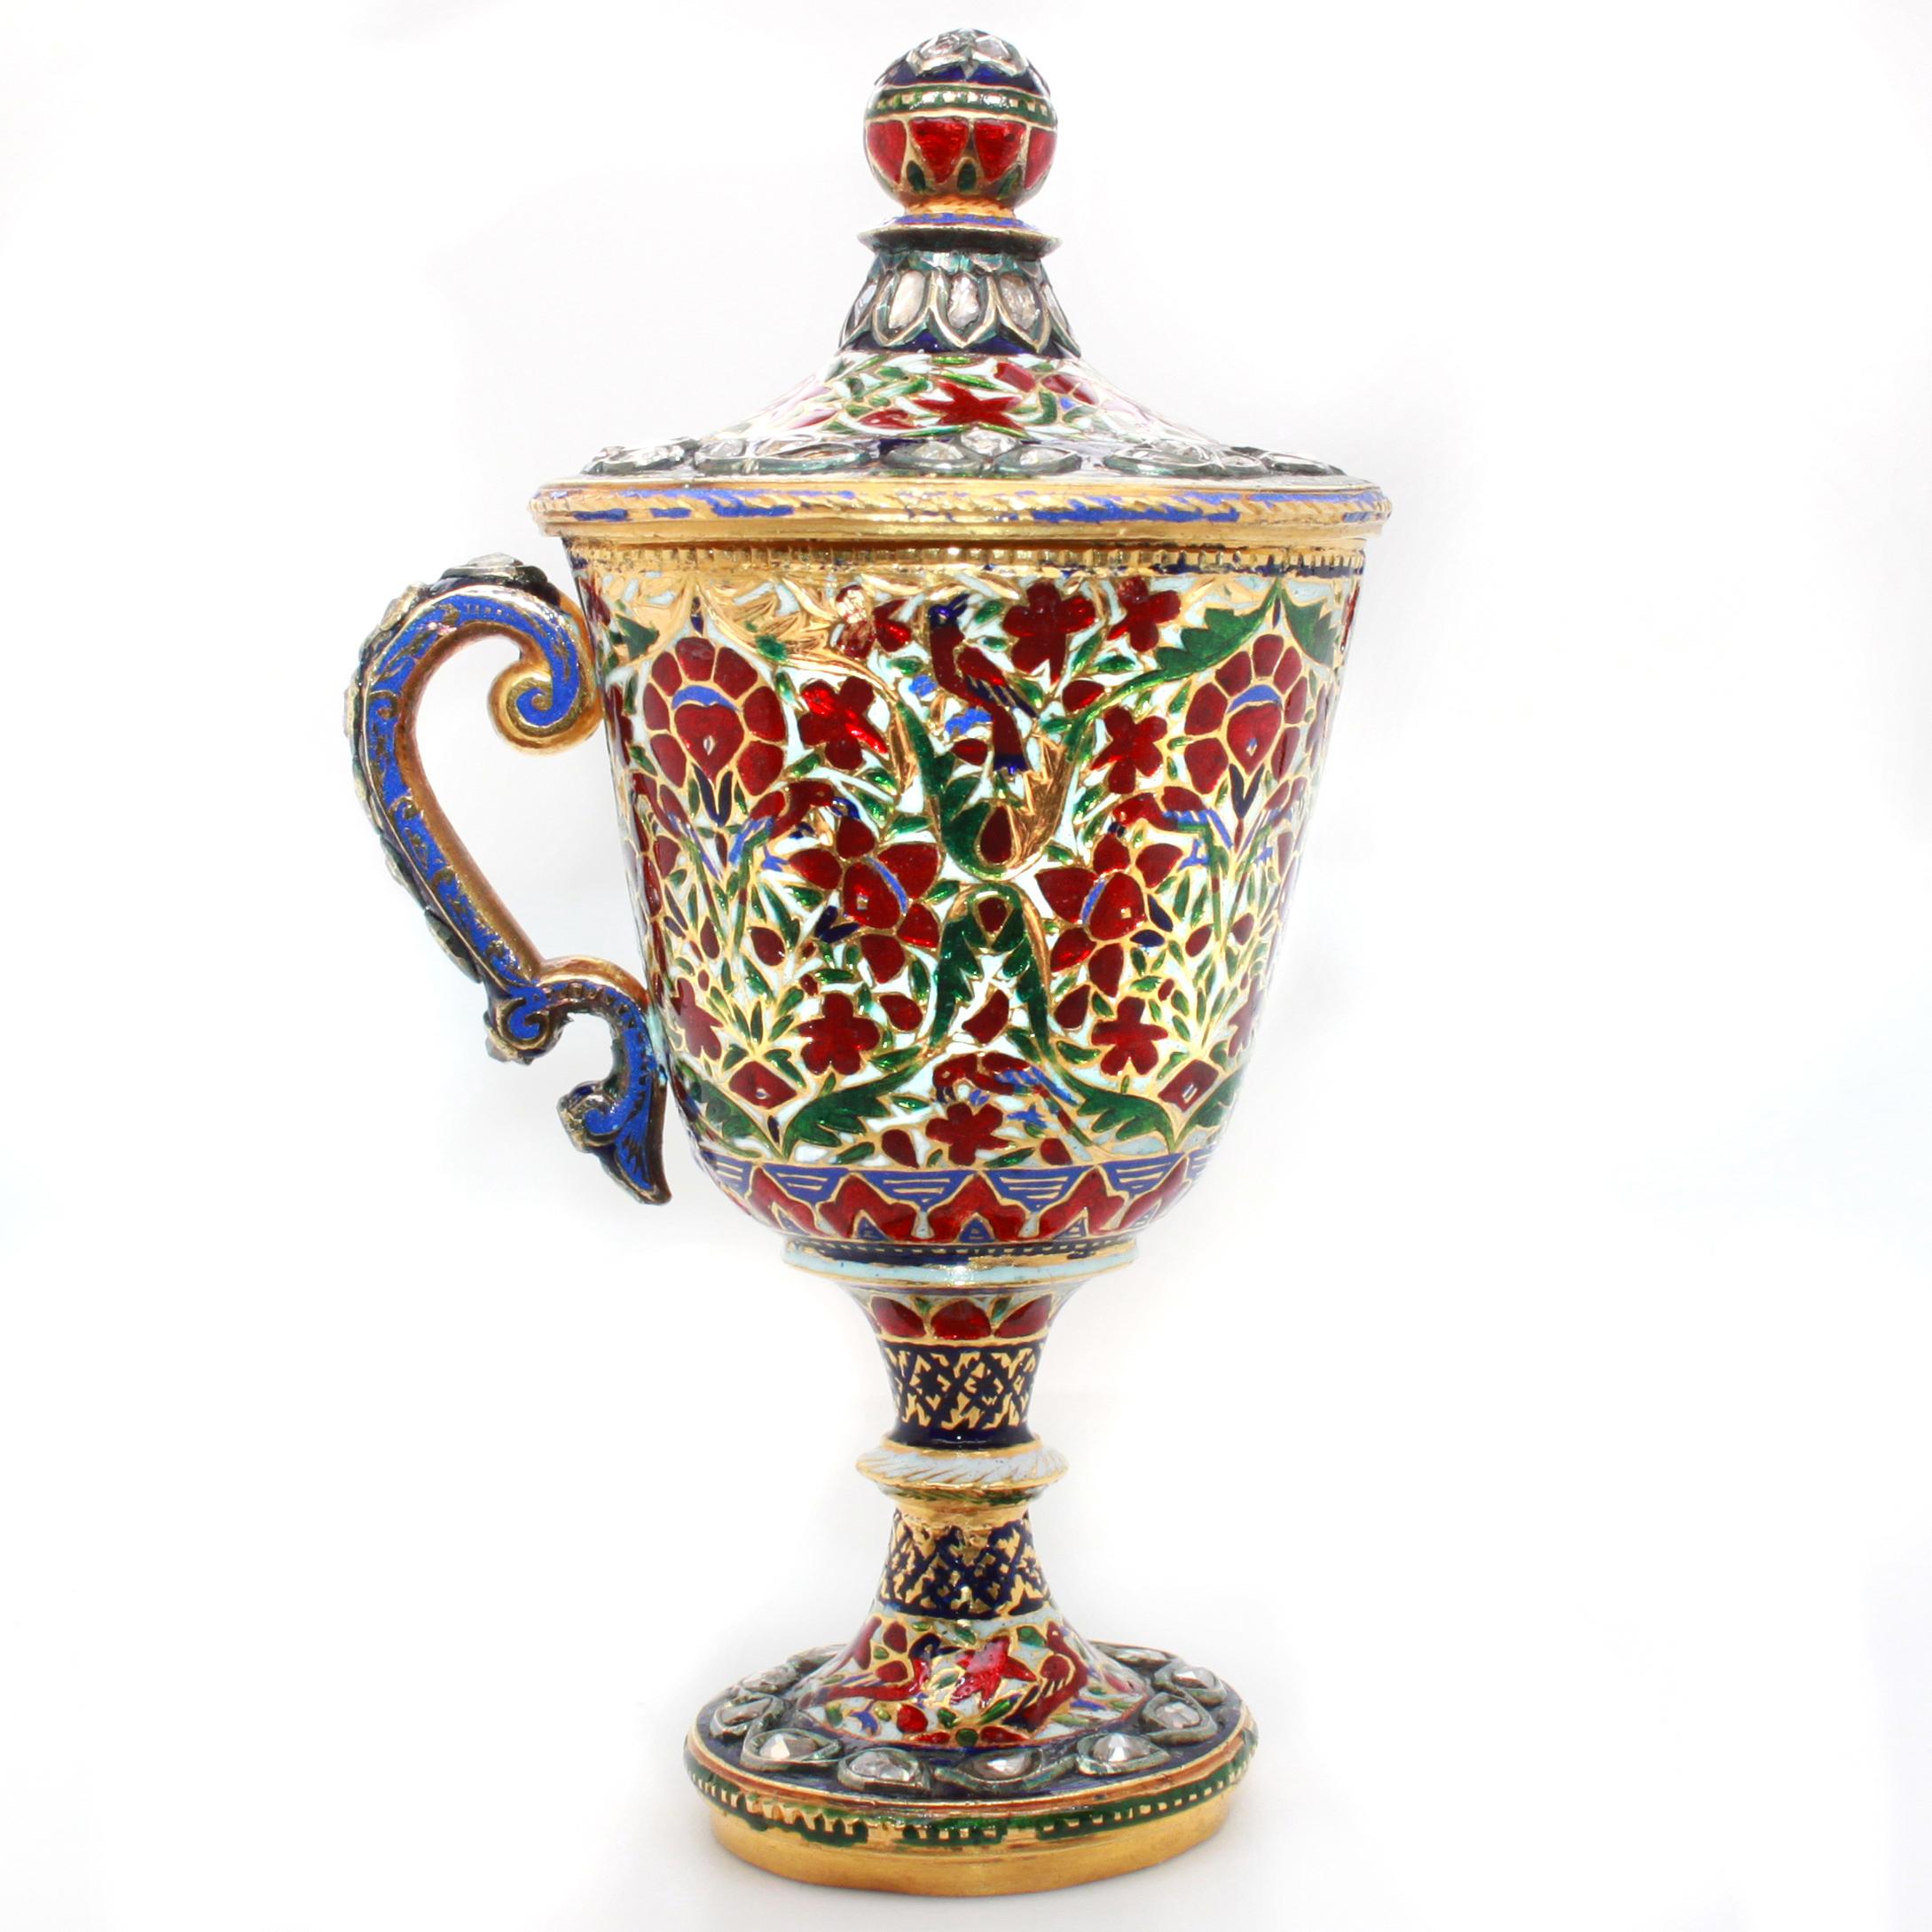 Rare Mughal Enamel and Diamond Cup, Early 19th Century In Good Condition For Sale In Idar-Oberstein, DE